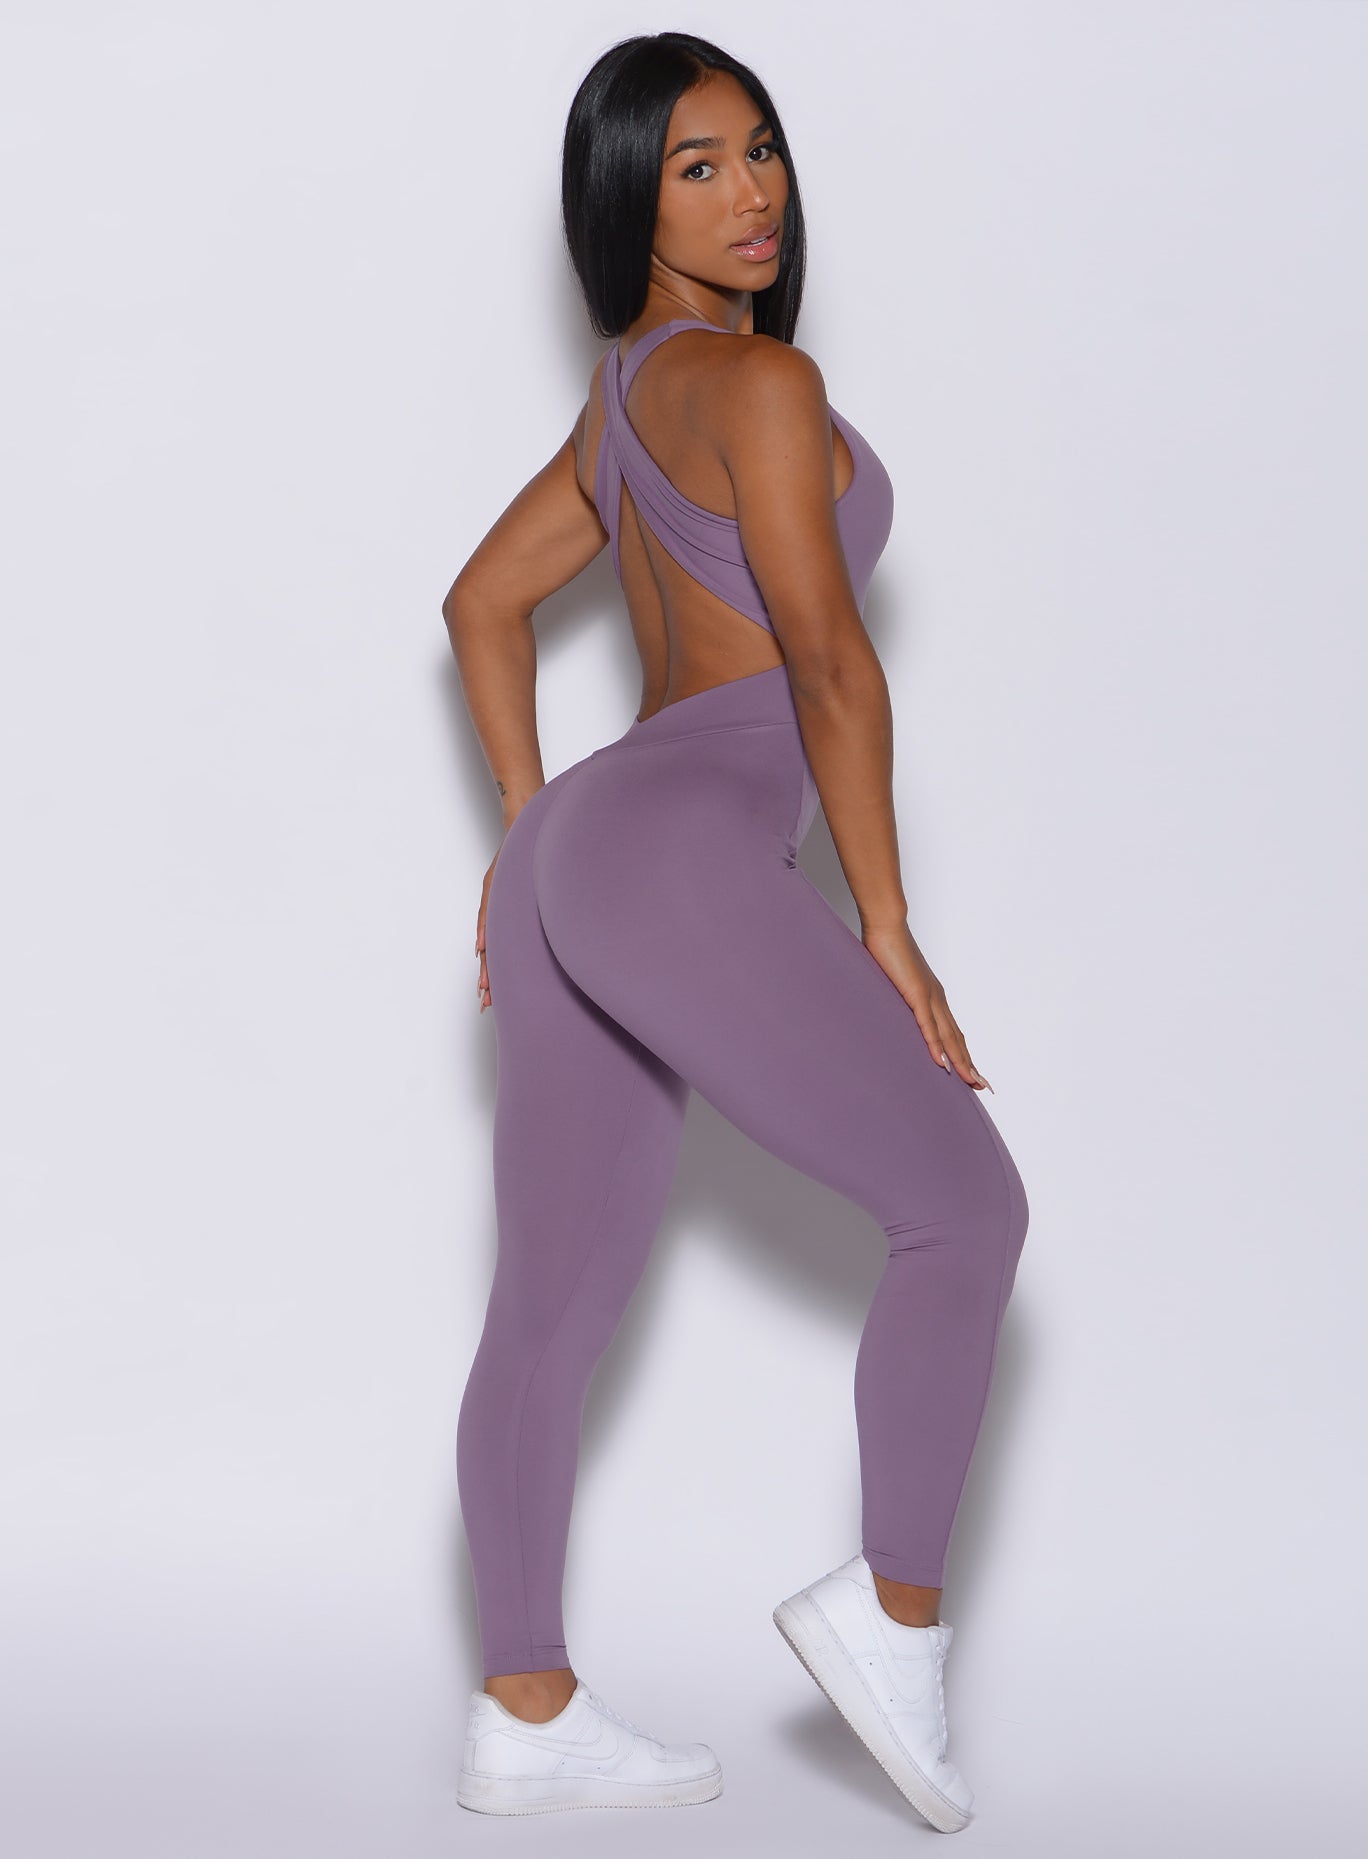 Right side  profile view of a model facing to her right wearing our laced bodysuit in Violet Frost color